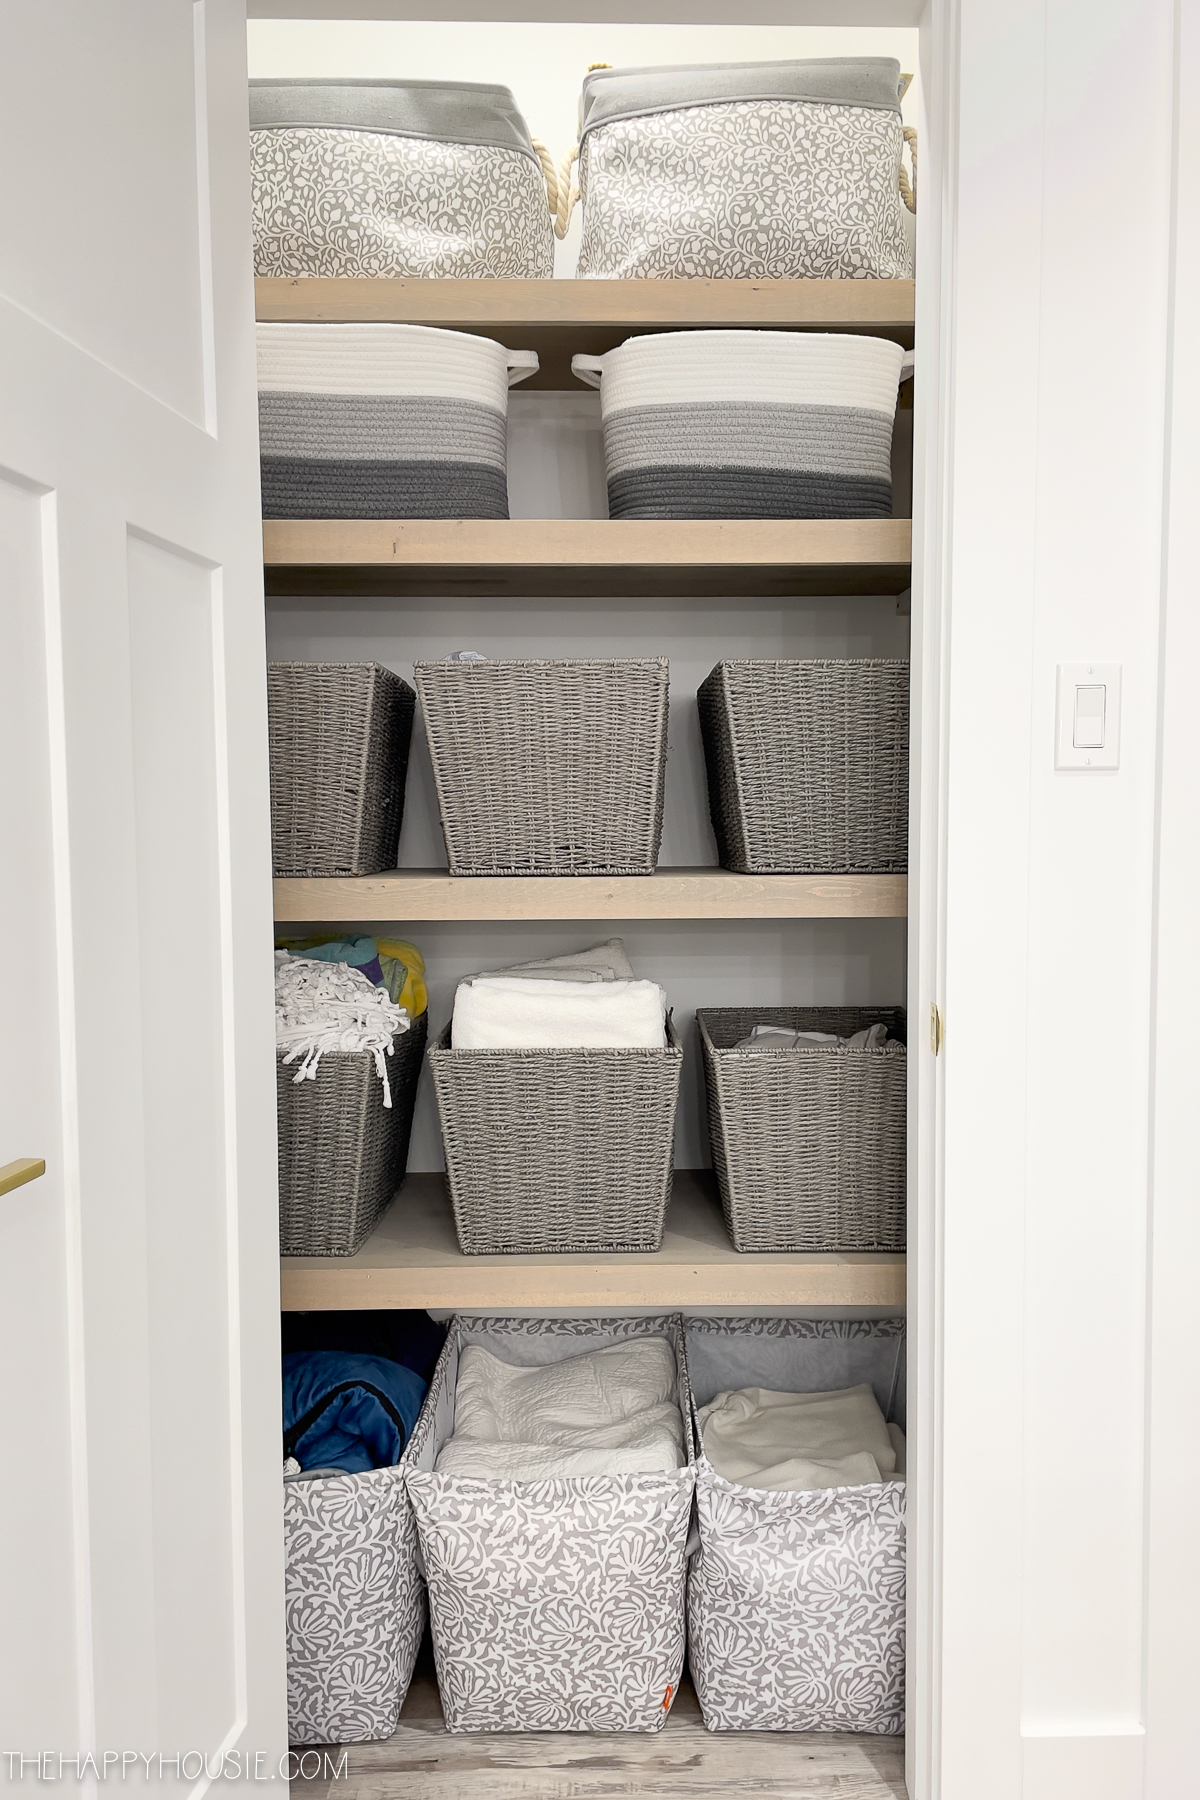 How to Fold Bath Towels for a Tidy Linen Closet